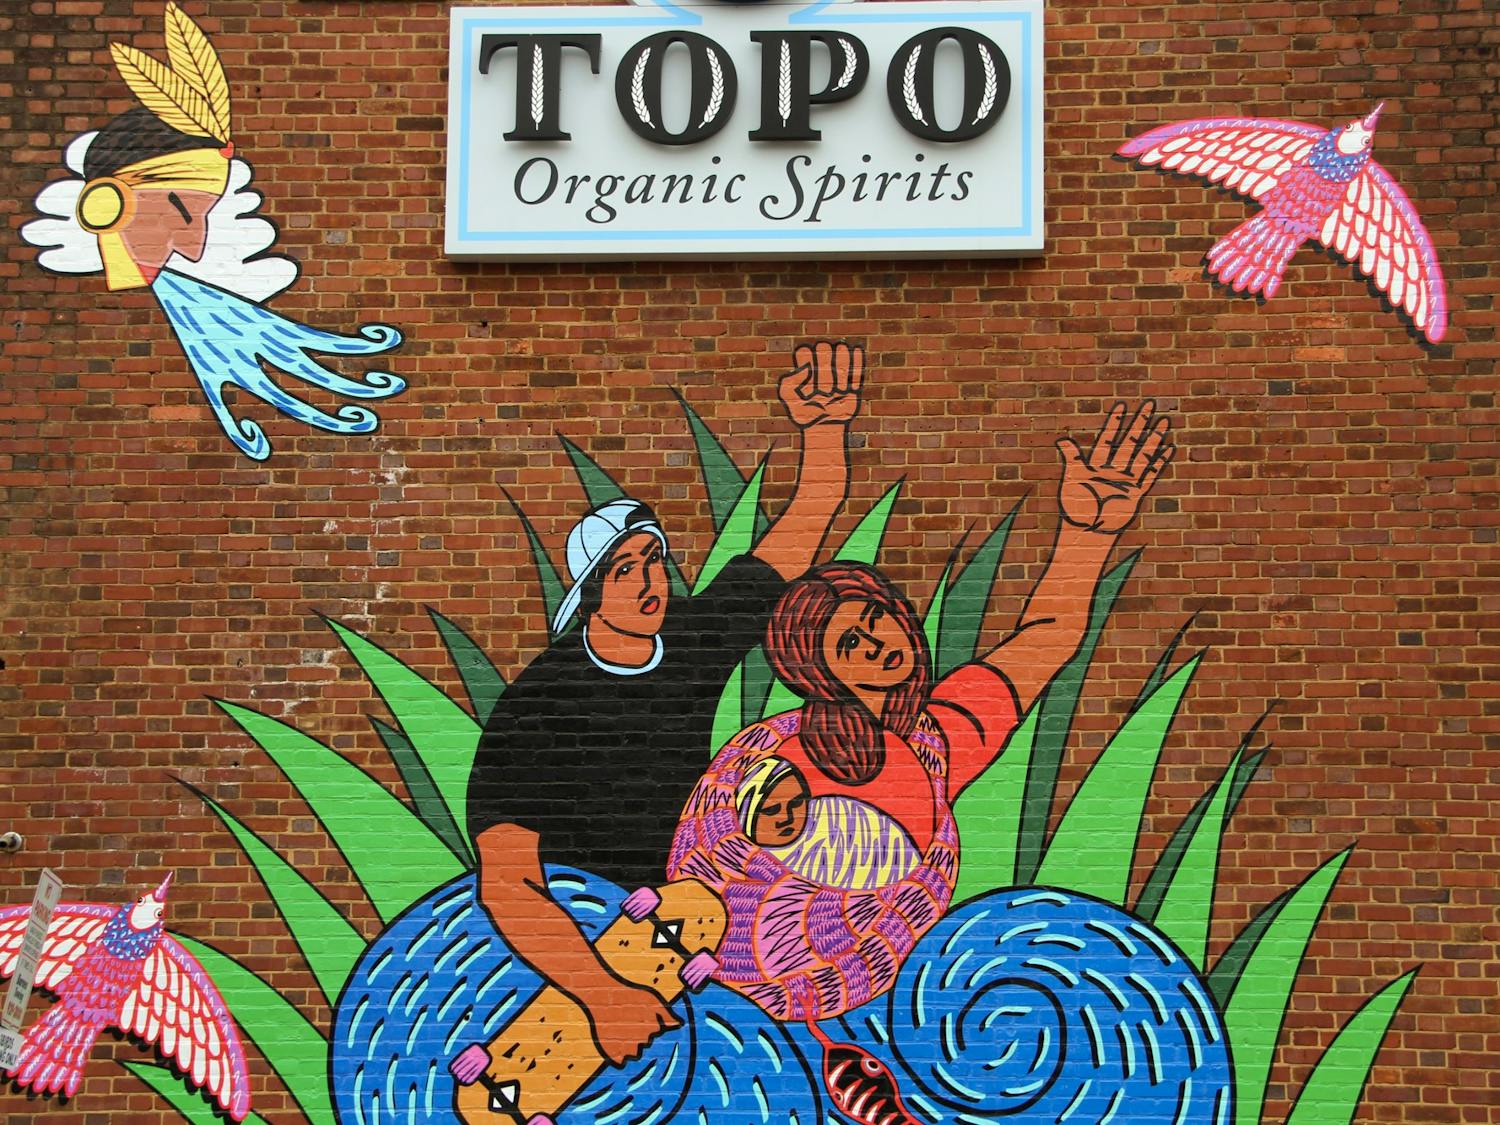 Successions by Renzo Oretega is at the TOPO distillery on West Franklin st.